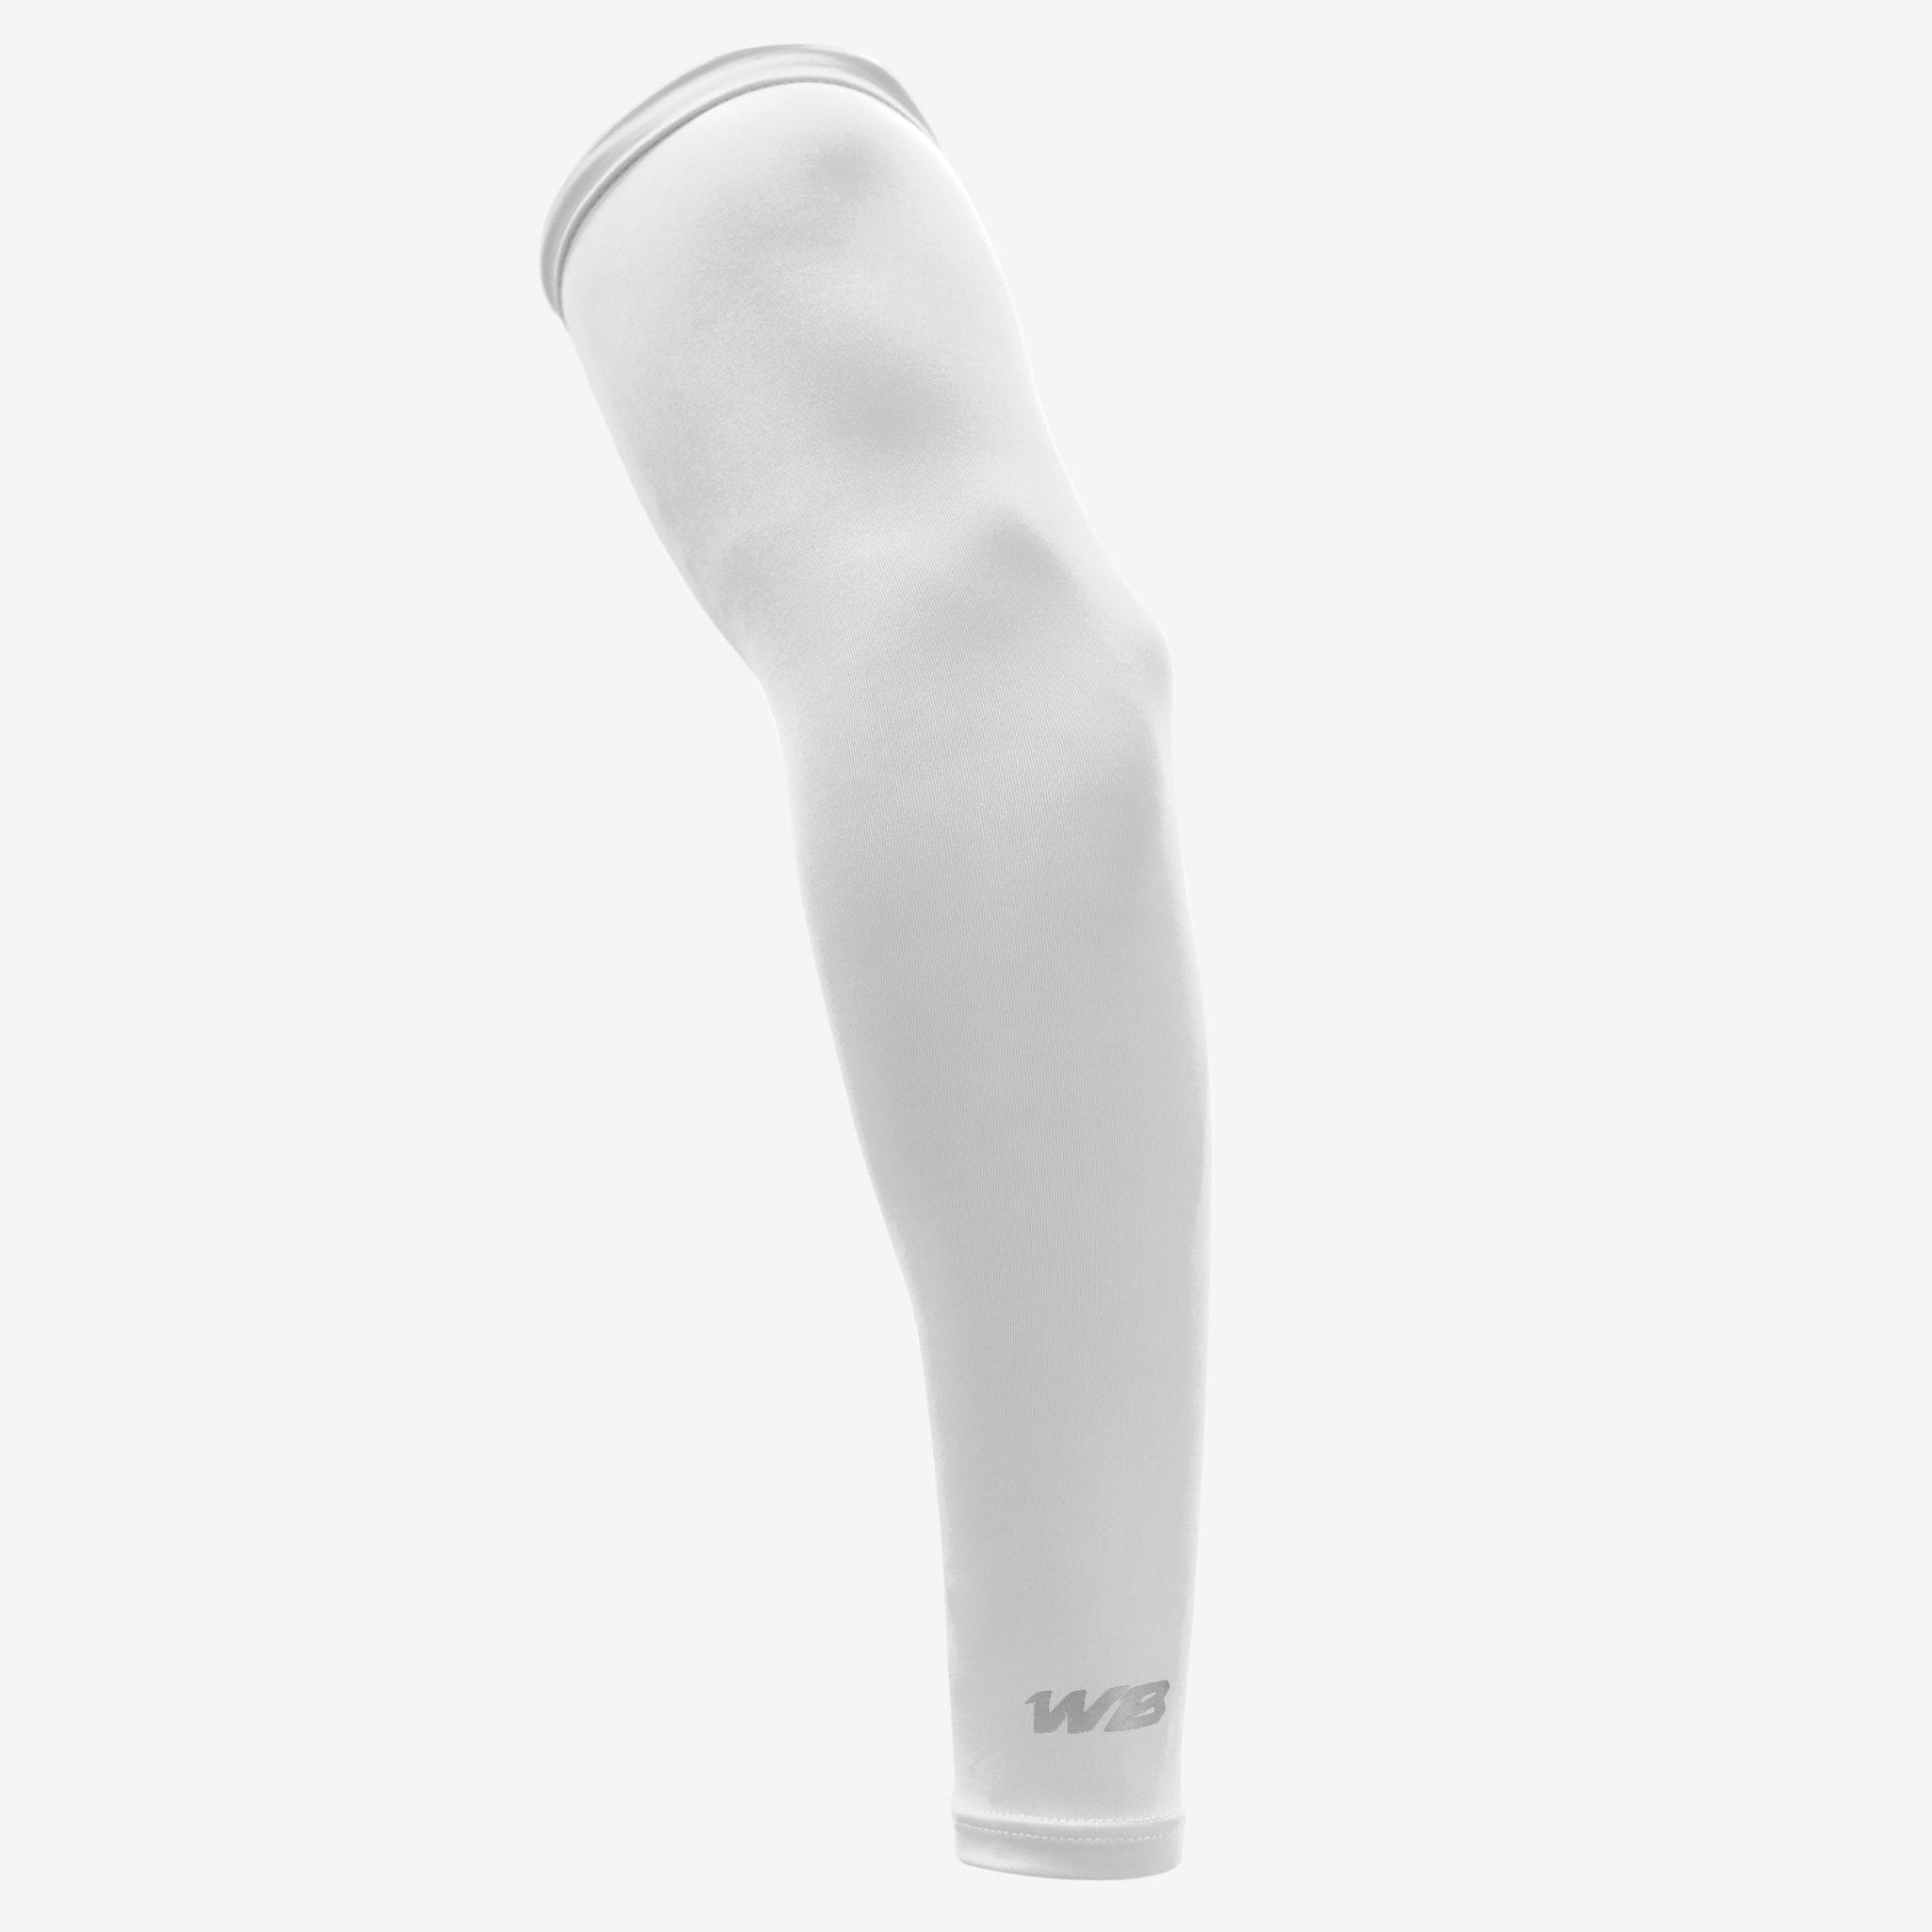 We Ball Sports Compression Arm Sleeve - Cooling, Moisture Wicking,  Breathable For Basketball, Football, Baseball (White, L) 